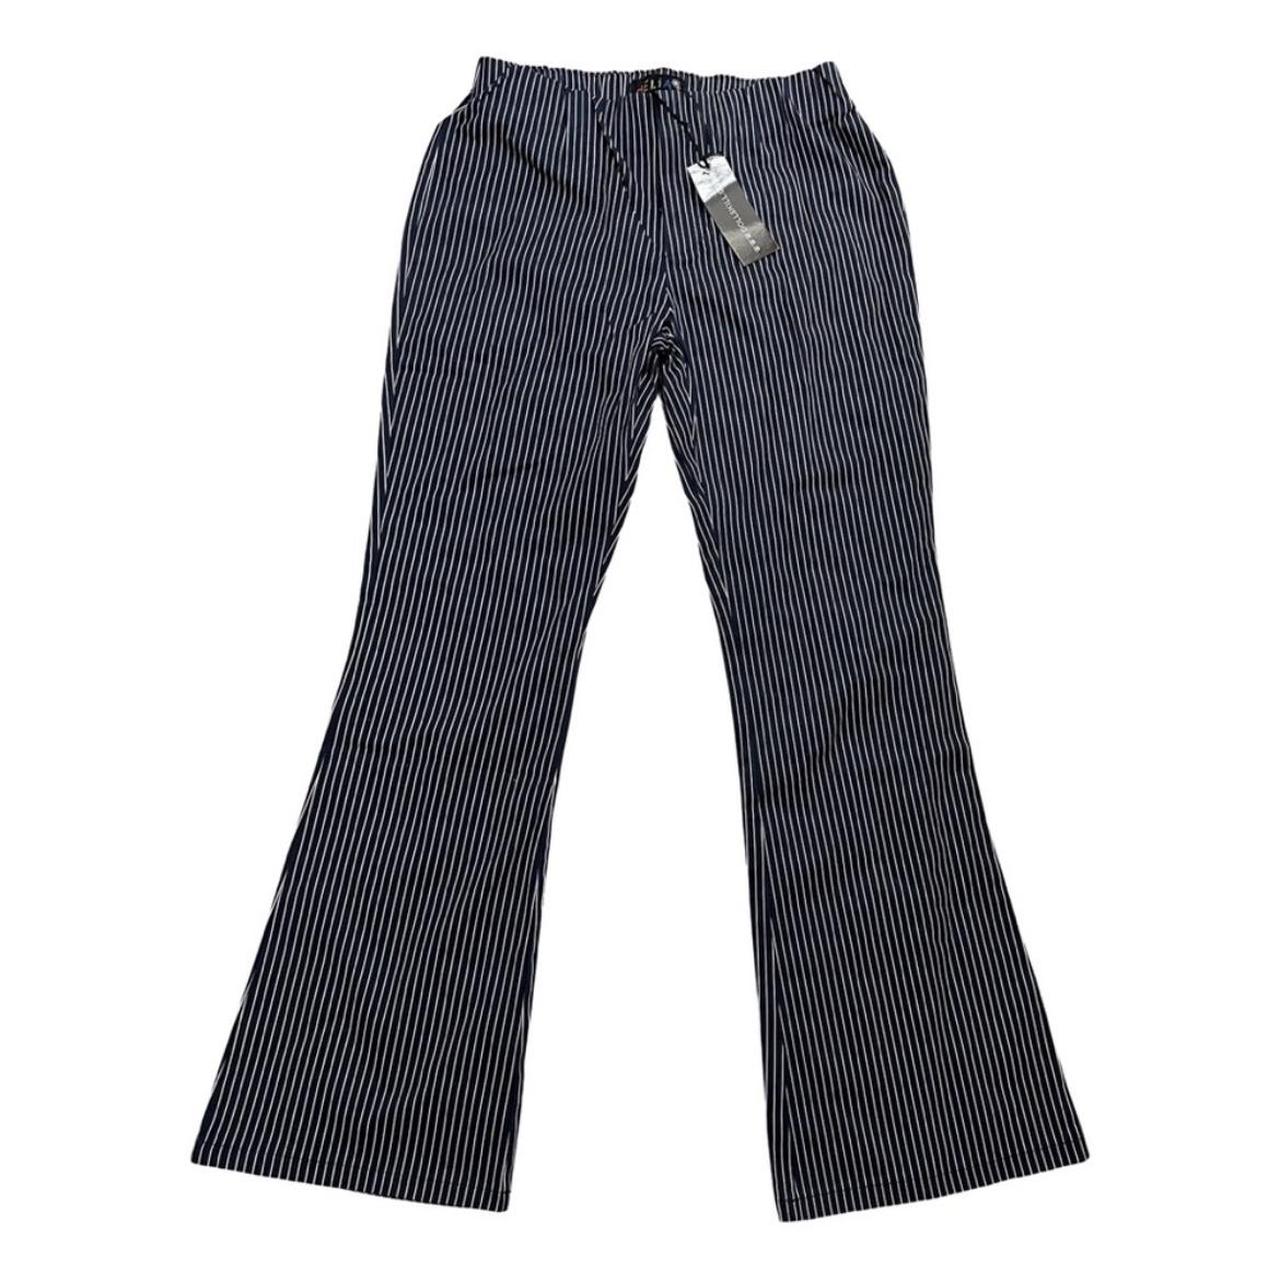 Delia's Women's Navy and White Trousers